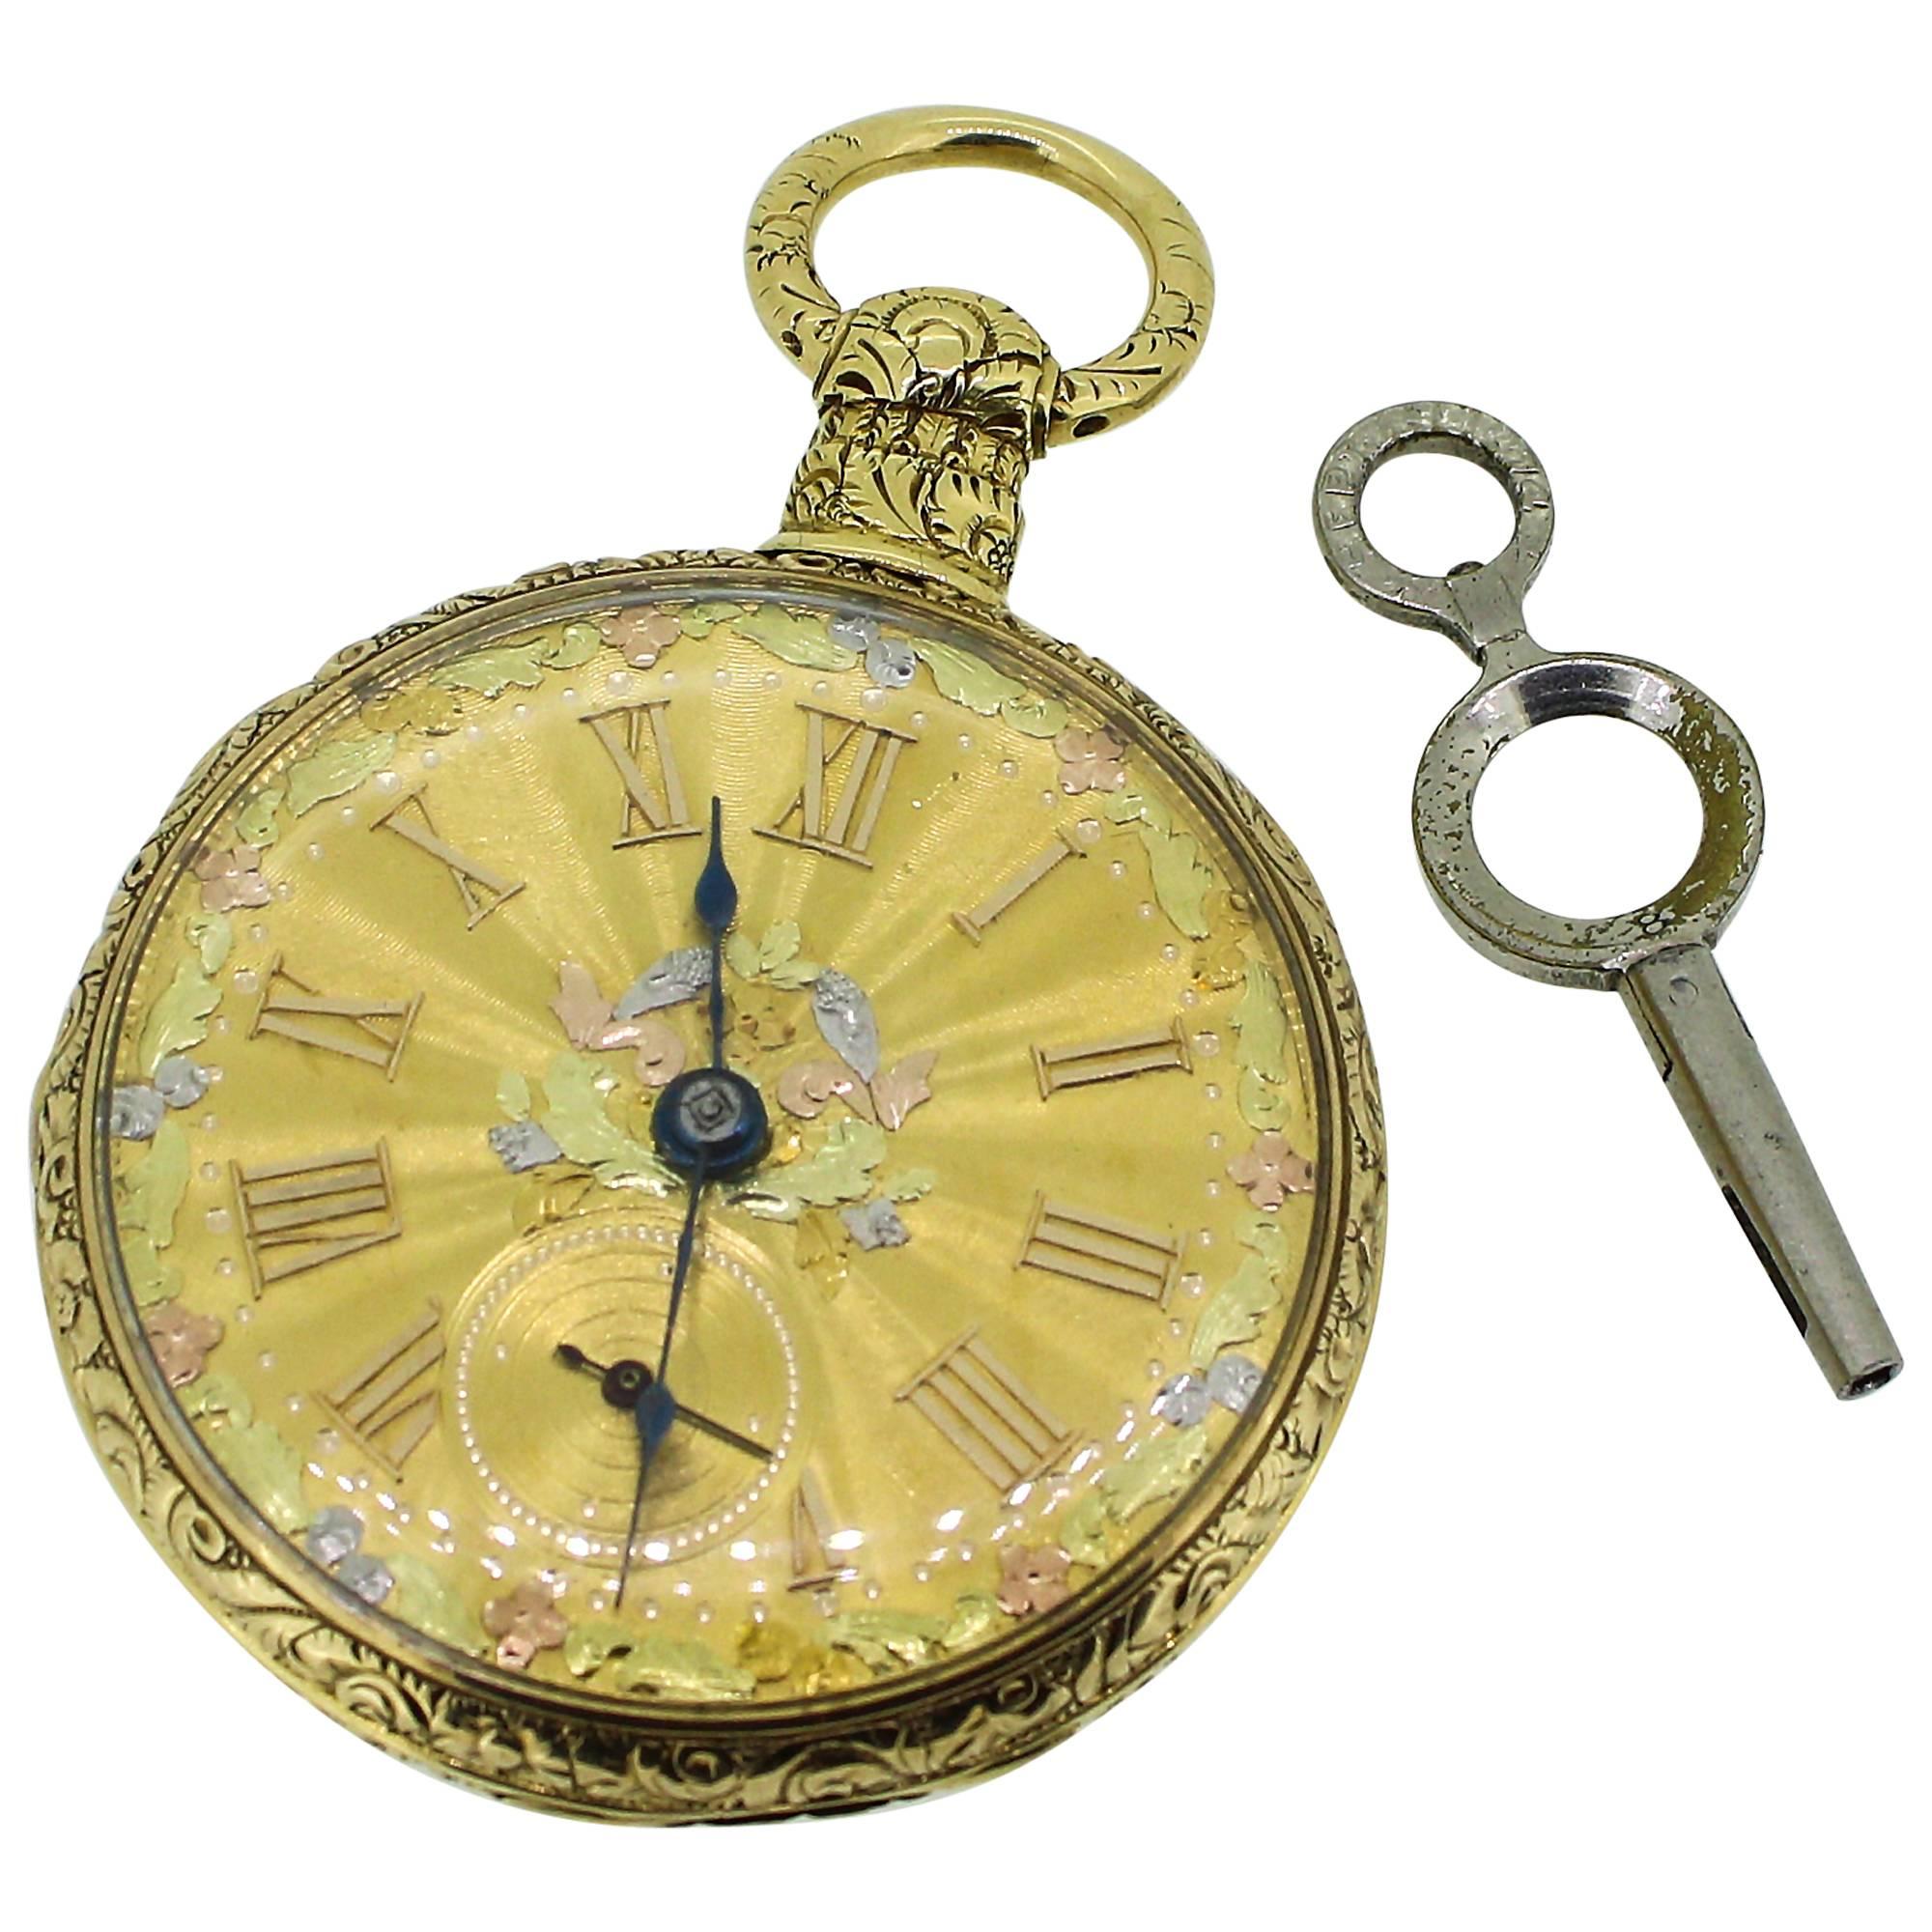 Pre-1822 MI Tobias and Co 18K Yellow Gold Pocket Watch with Winding Key